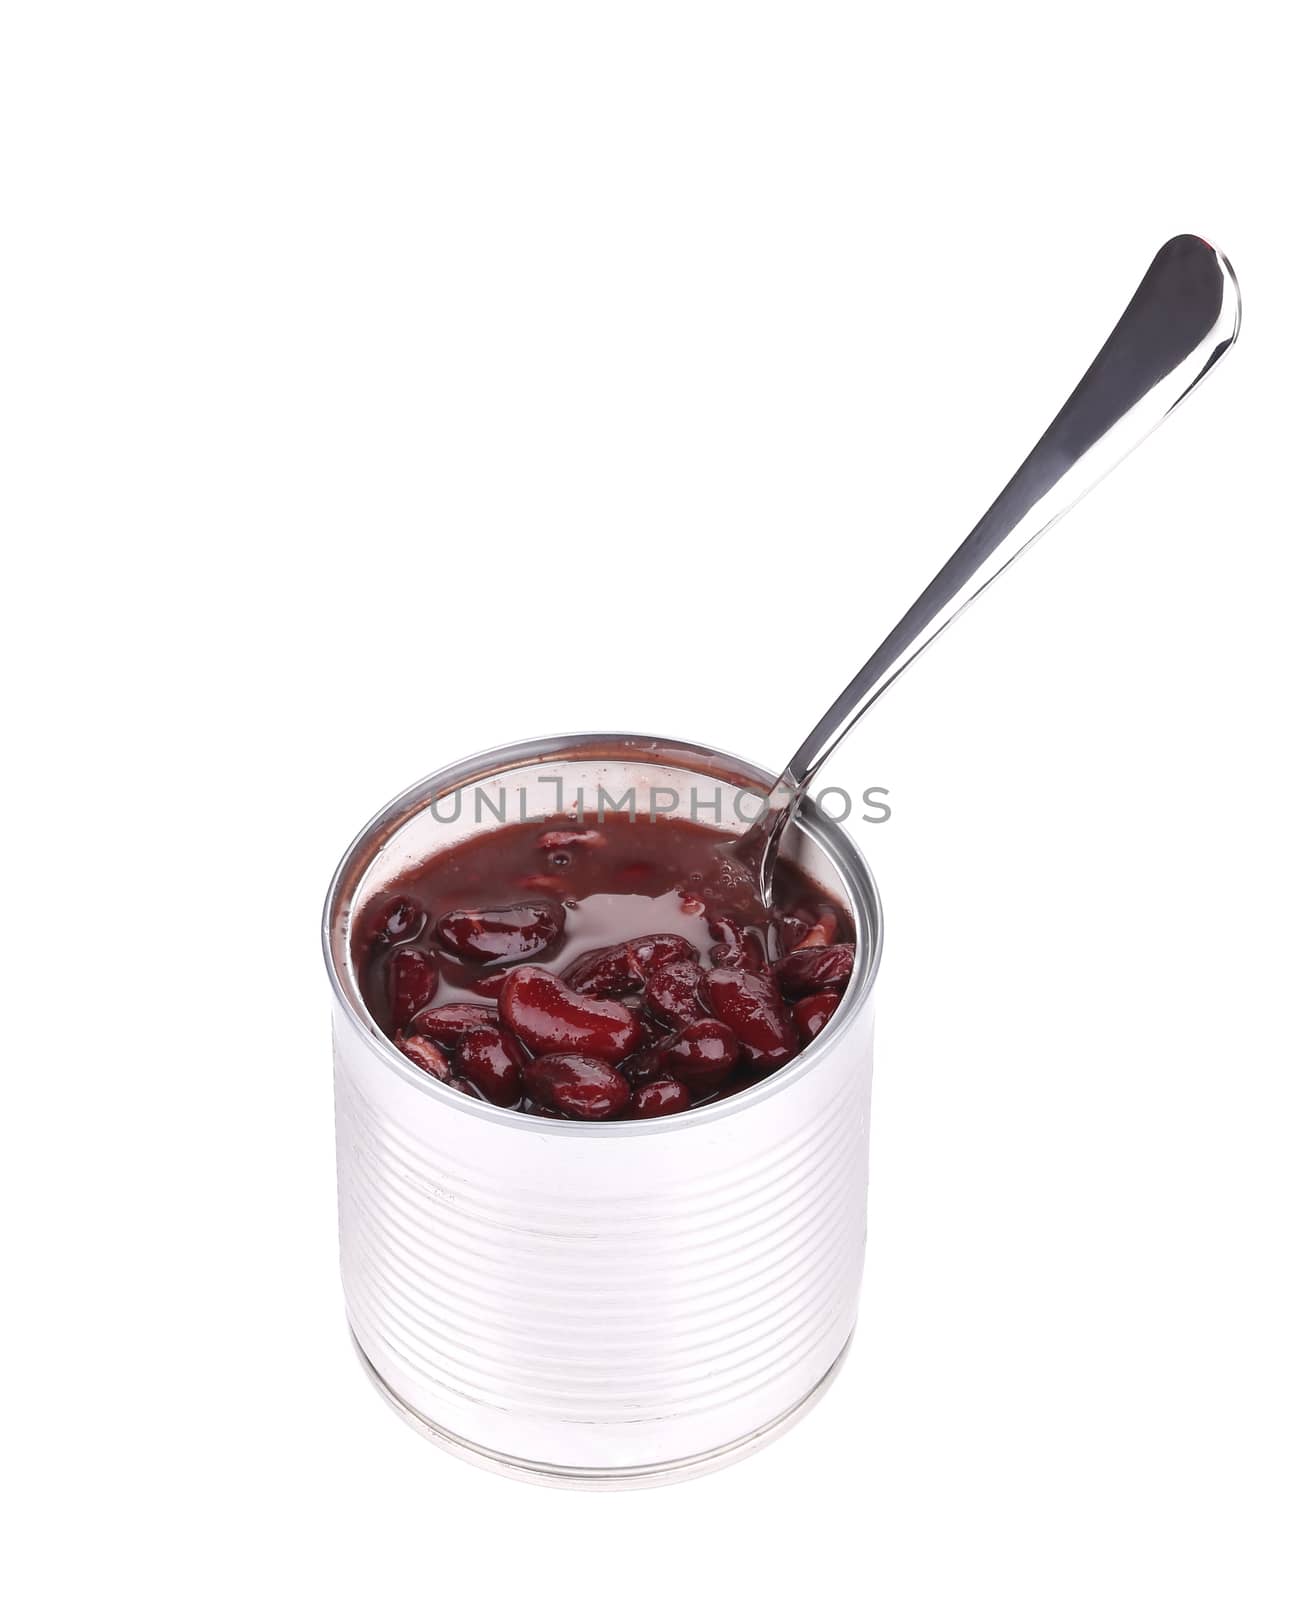 Tin of red bean with spoon. Isolated on a white background.